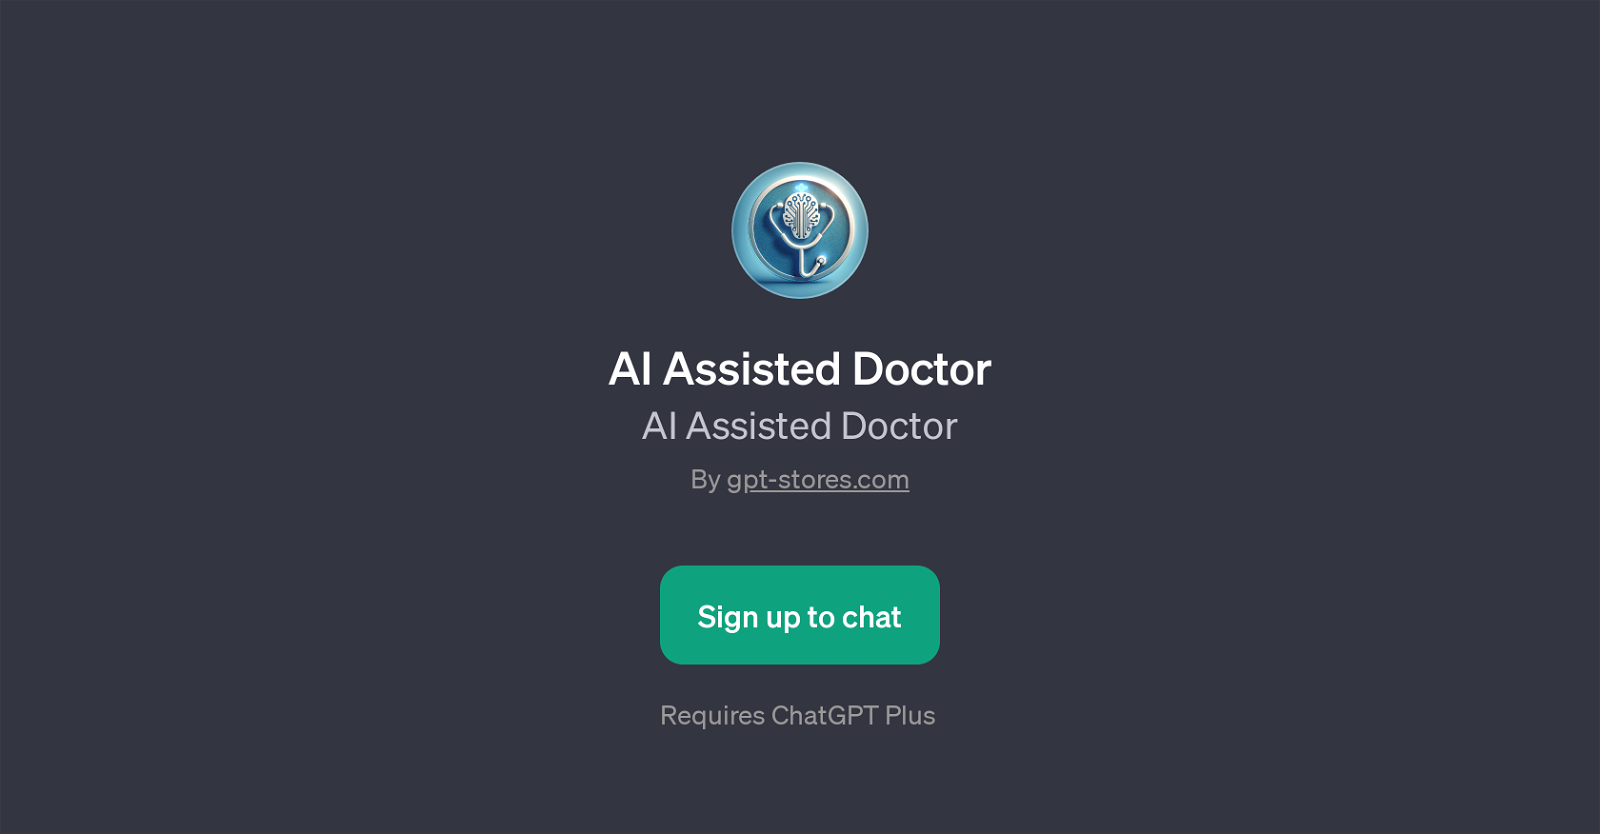 AI Assisted Doctor website